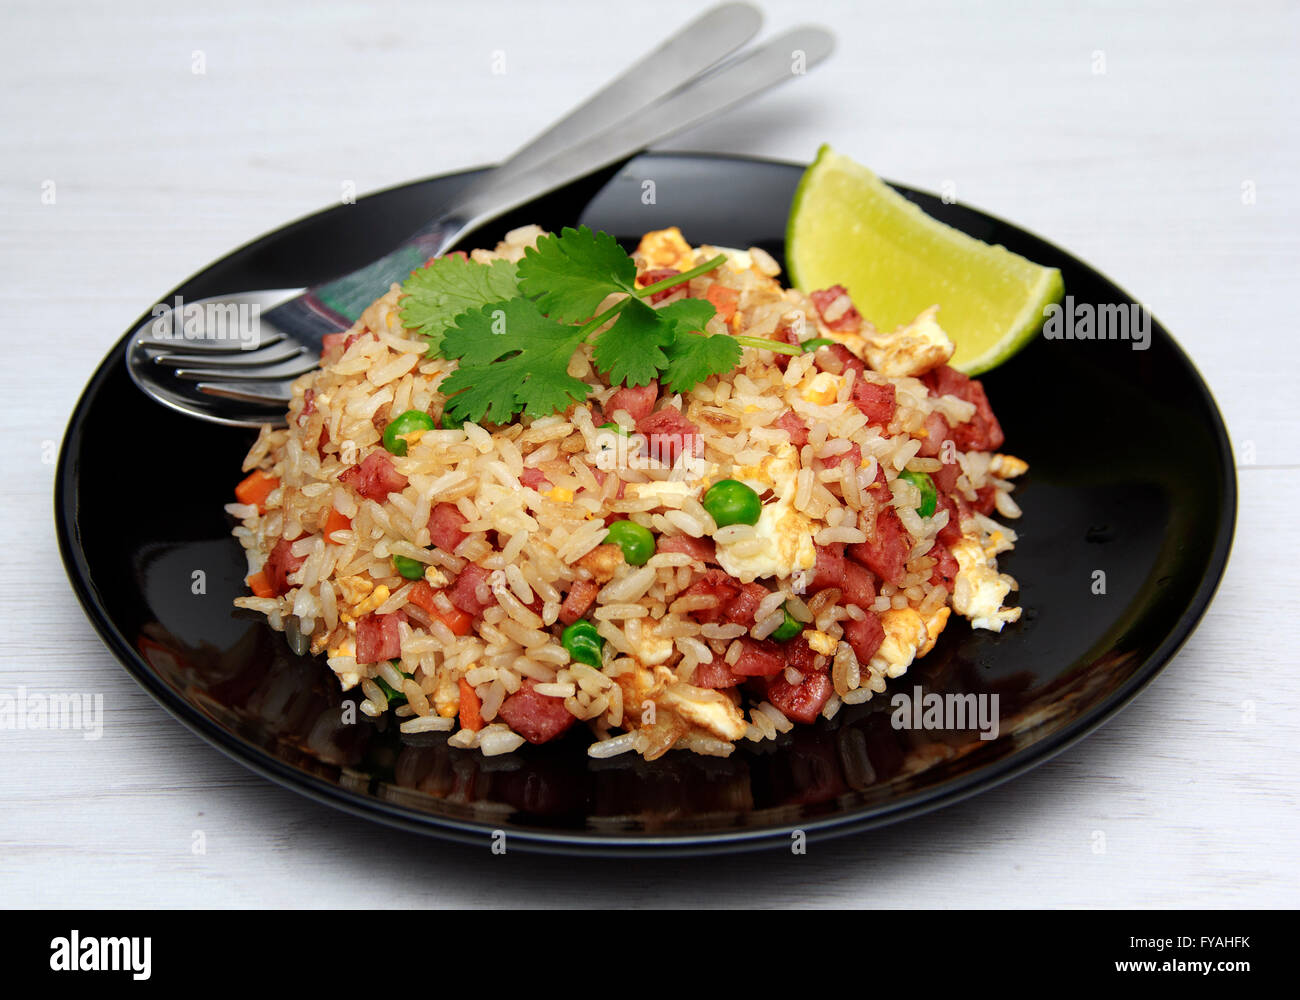 Dice Bacon Fried rice in black dish Stock Photo